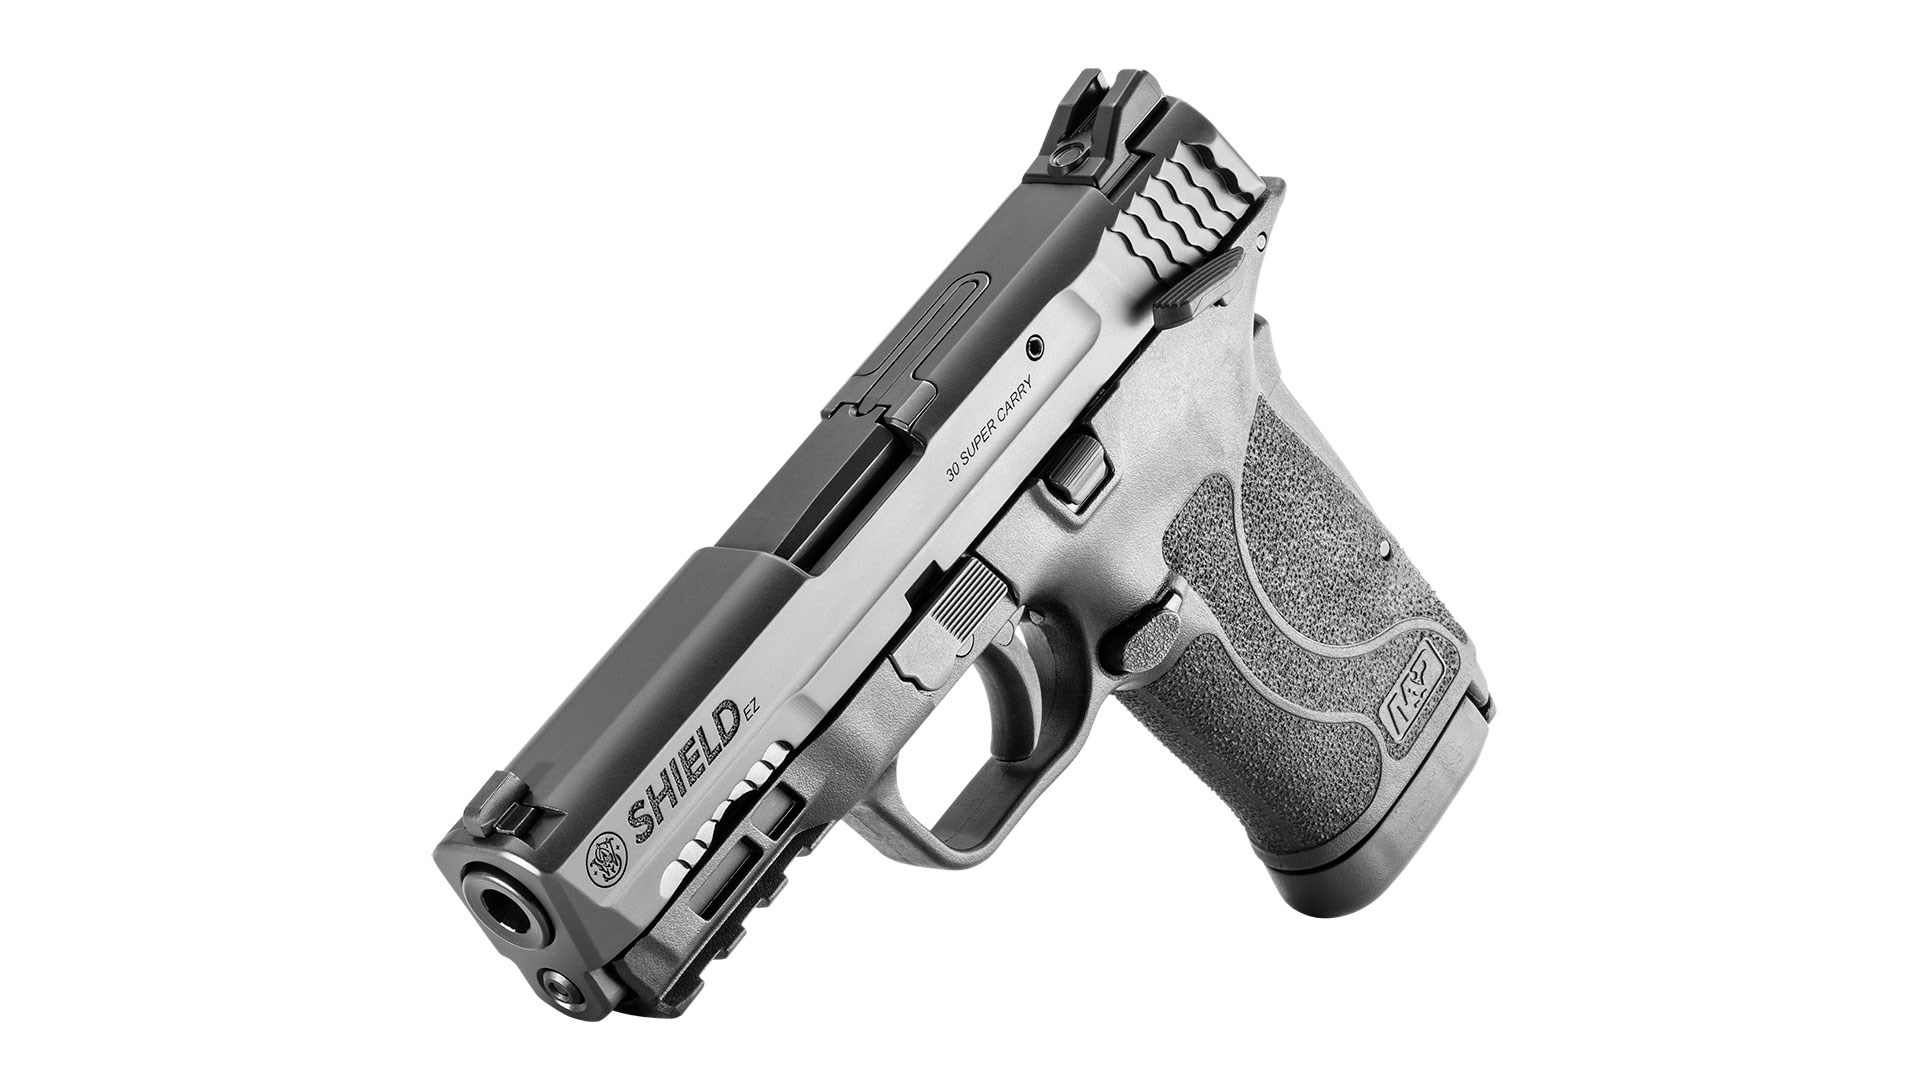 Left side of the Smith & Wesson M&P 30 Shield EZ in 30 Super Carry shown on white.